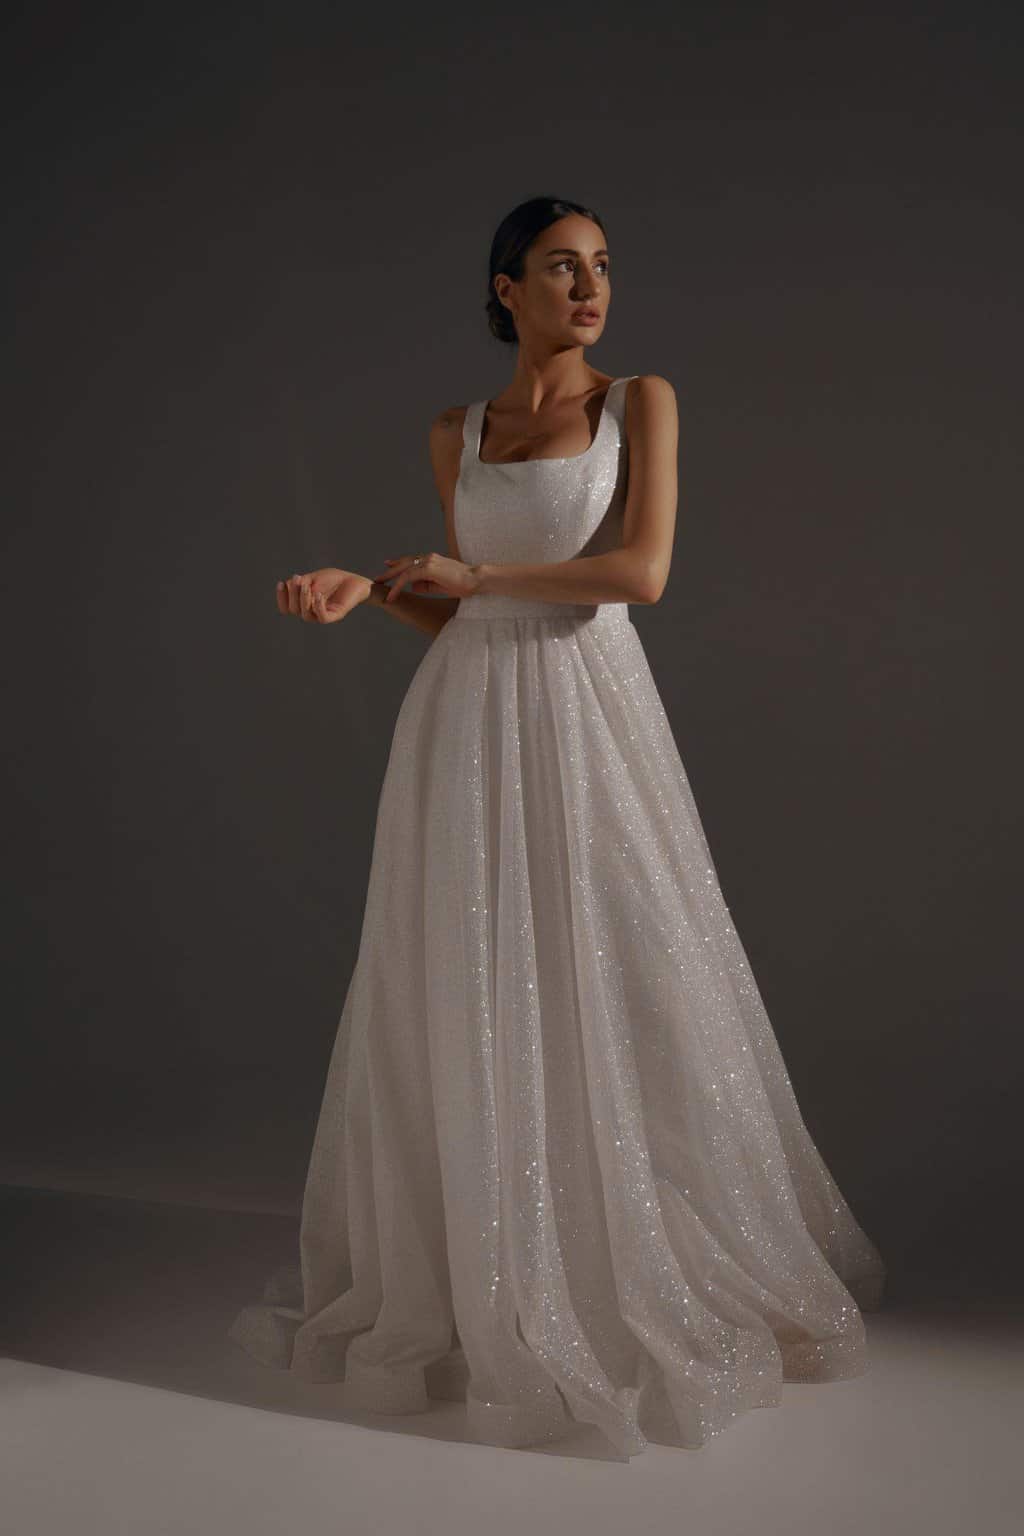 Top 9 Dresses from New Devotion Collection by Olivia Bottega 45